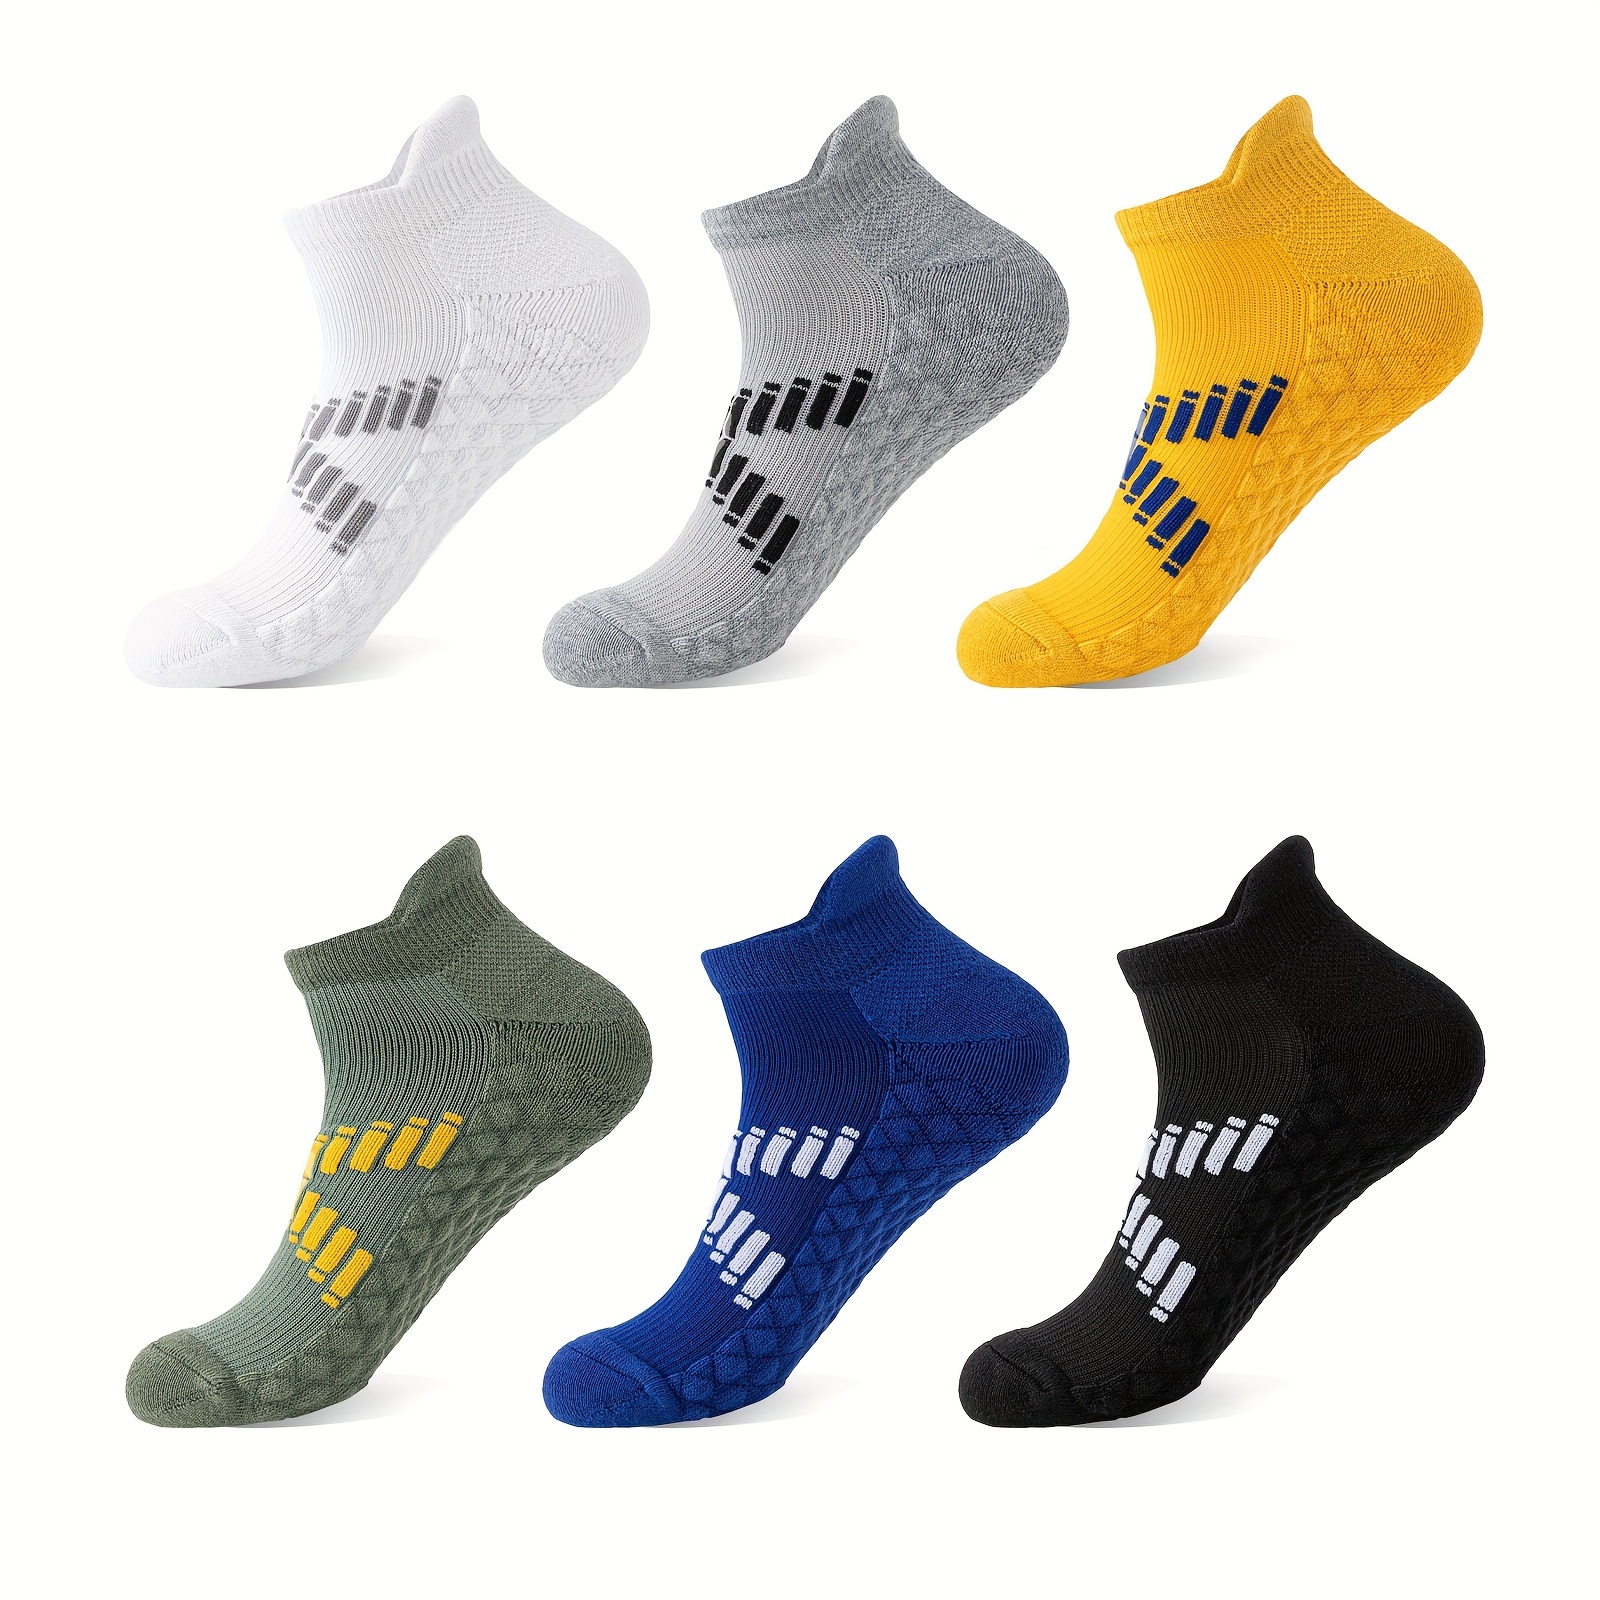 

6 Pairs Of Unisex Sweat Socks, Men's And Women's Ankle Sport Socks, Non Slip Shock Absorption Blend Comfy Breathable Athletic Socks For Men's Hiking, Basketball Training, Running Outdoor Activitie